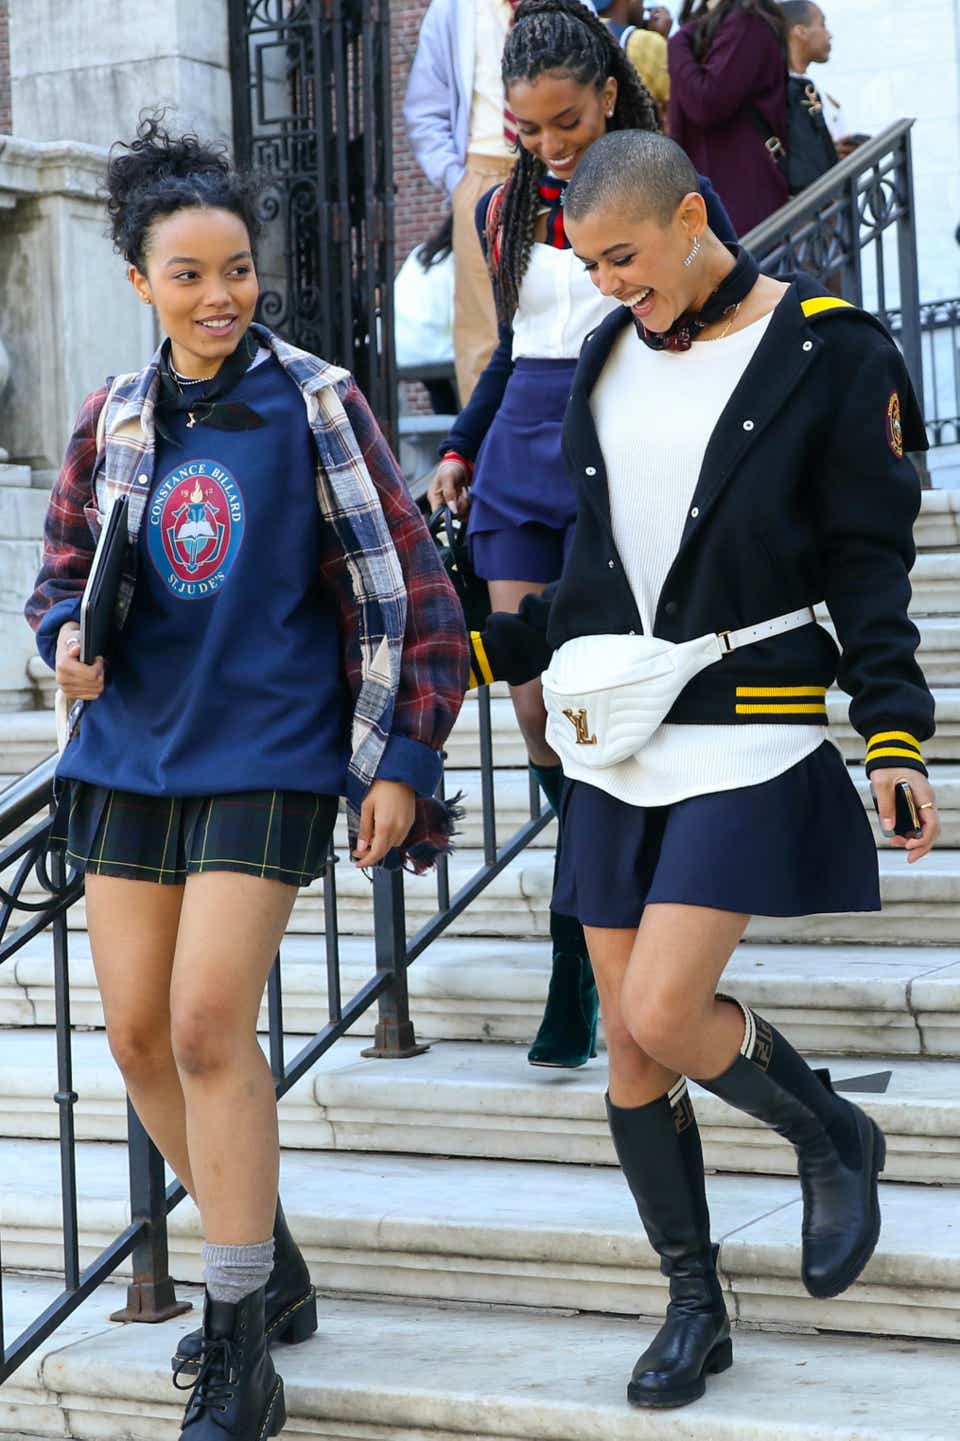 Jordan Alexander and Whitney Peak are seen at the film set of the 'Gossip Girl.'